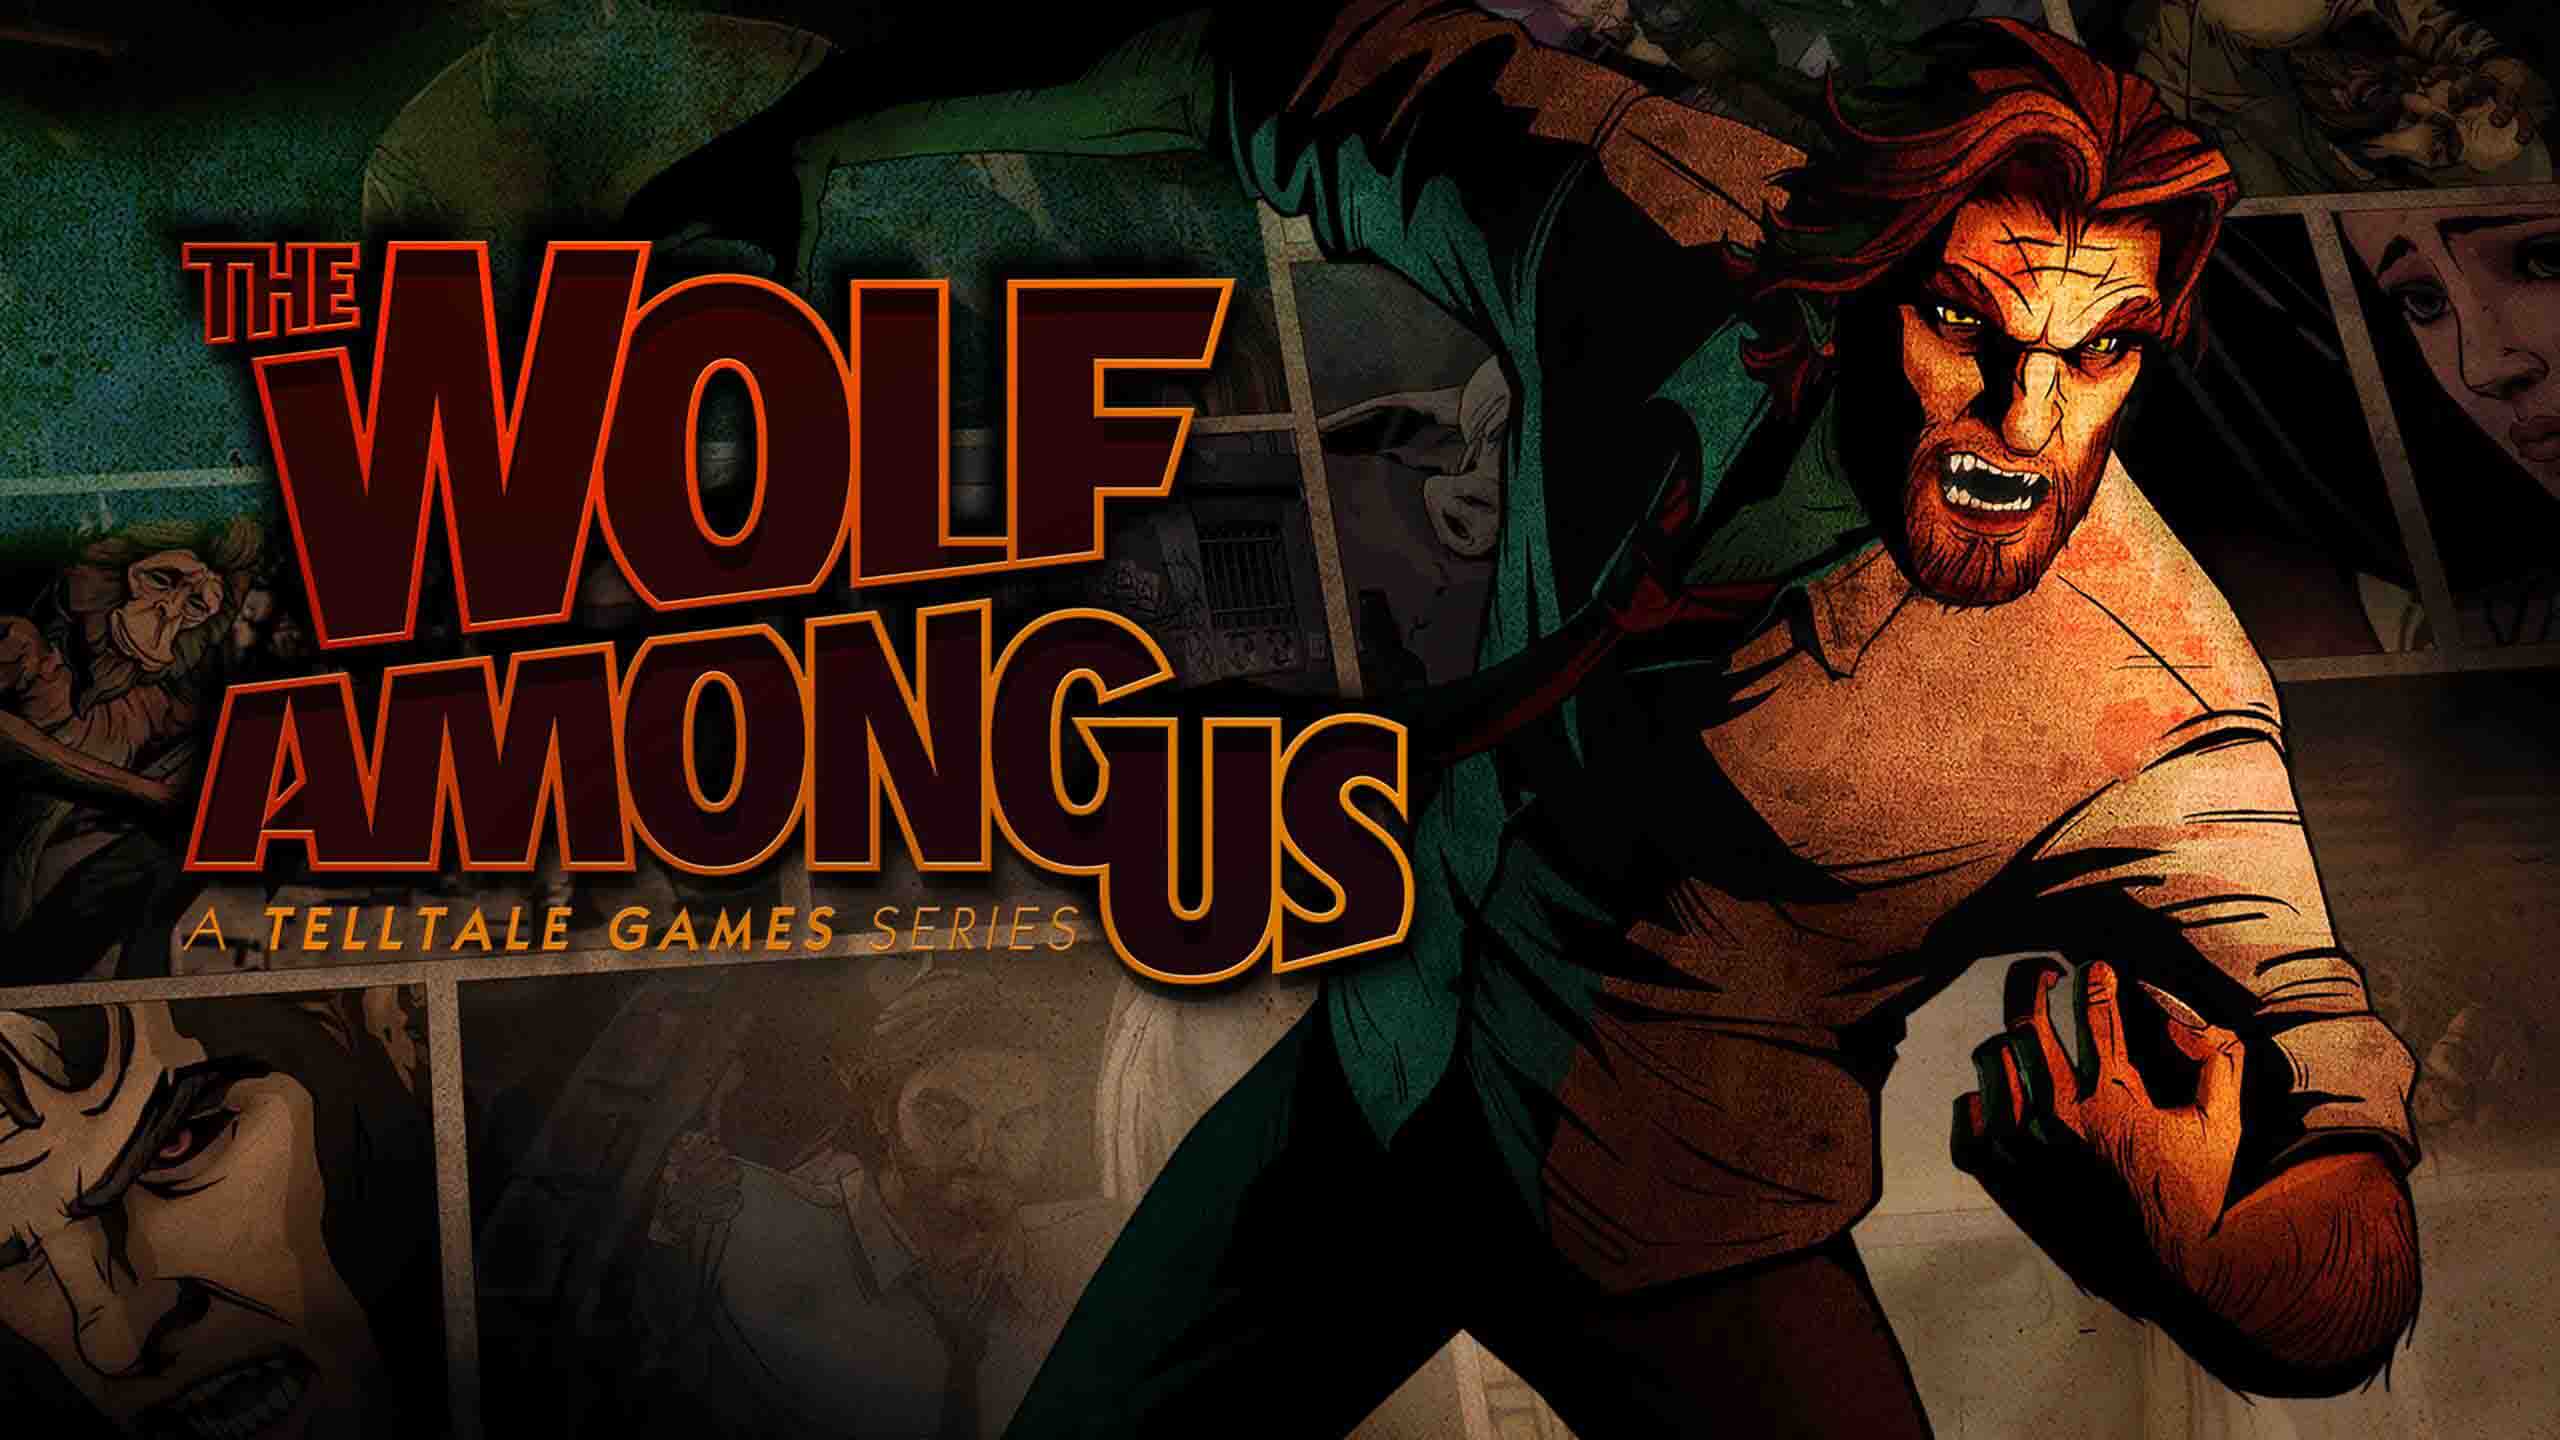 The Wolf Among Us System Requirements for PC Games minimum, recommended specifications for Windows, CPU, OS, Processor, RAM Memory, Storage, and GPU.